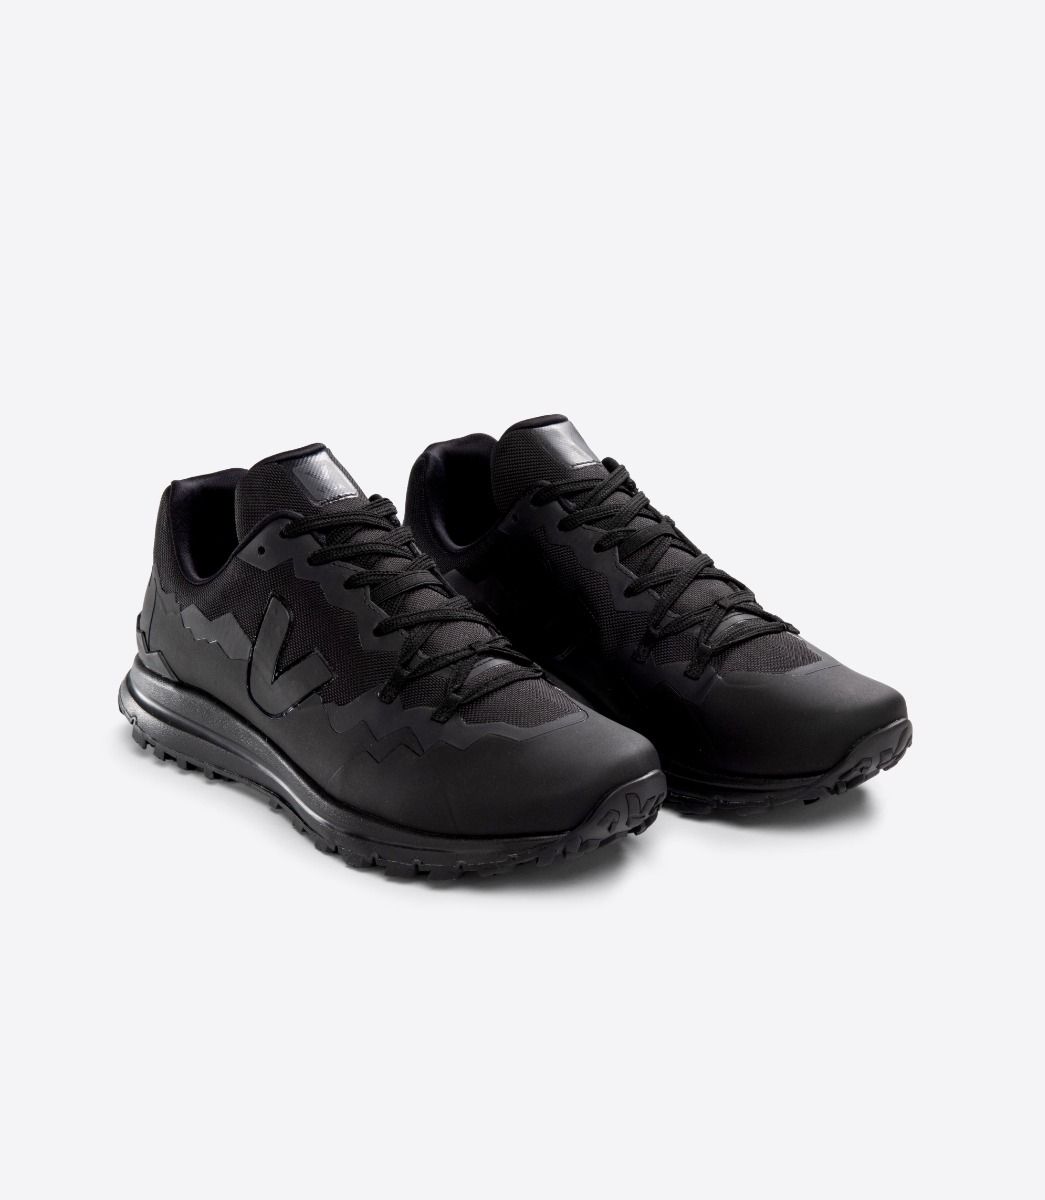 Front angle view of Men's Fitz Roy Trek shell trail shoes by VEJA in all black